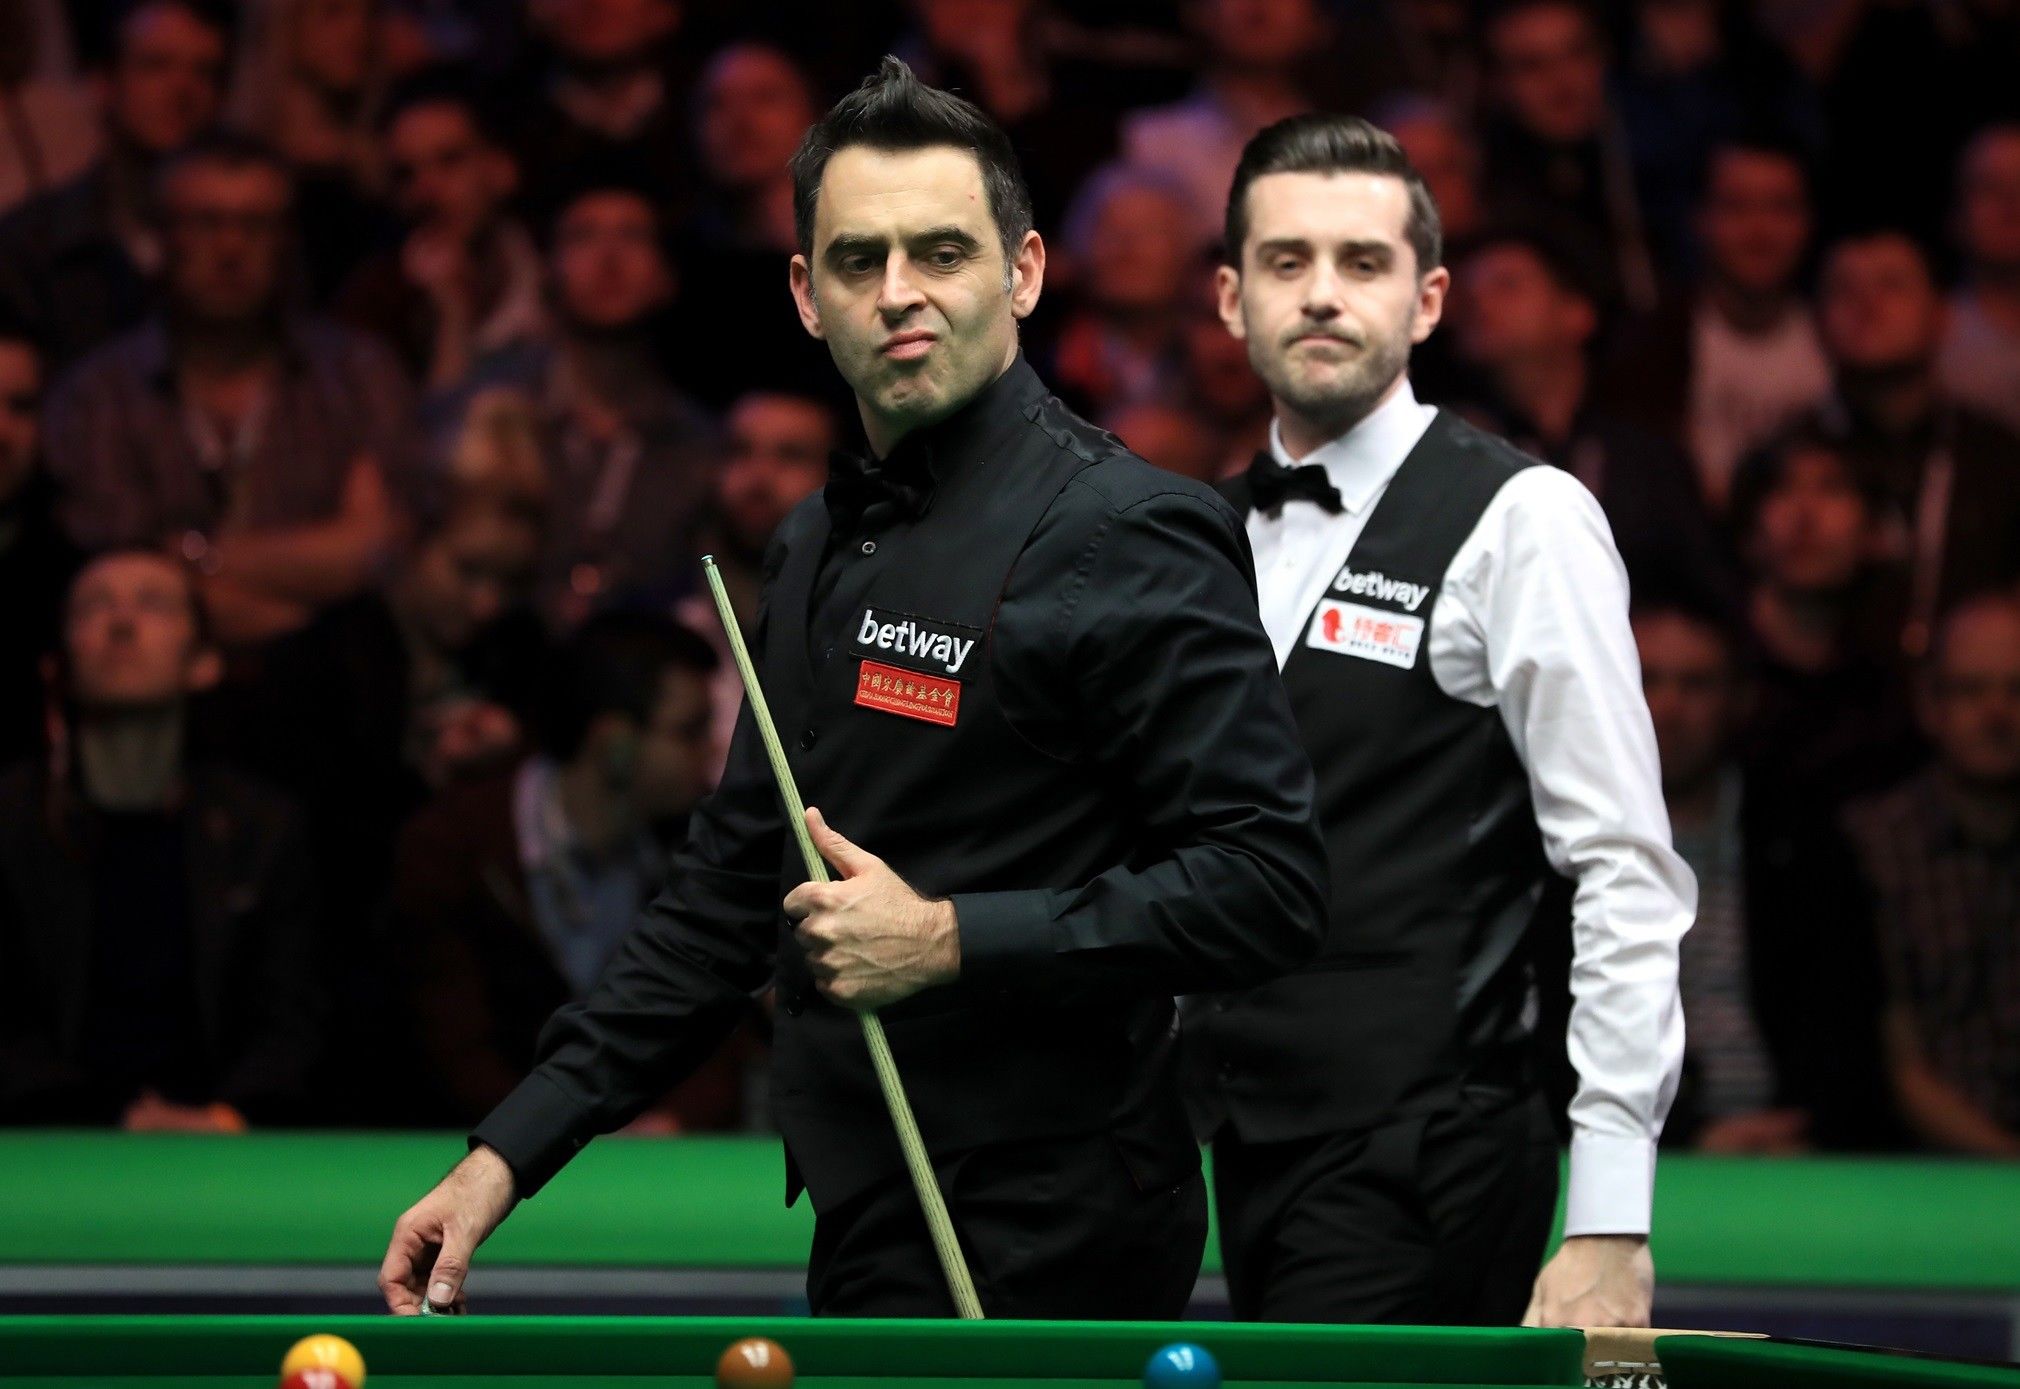 Ronnie OSullivan vs Mark Selby Prediction, Betting, Tips, and Odds 15 SEPTEMBER 2023